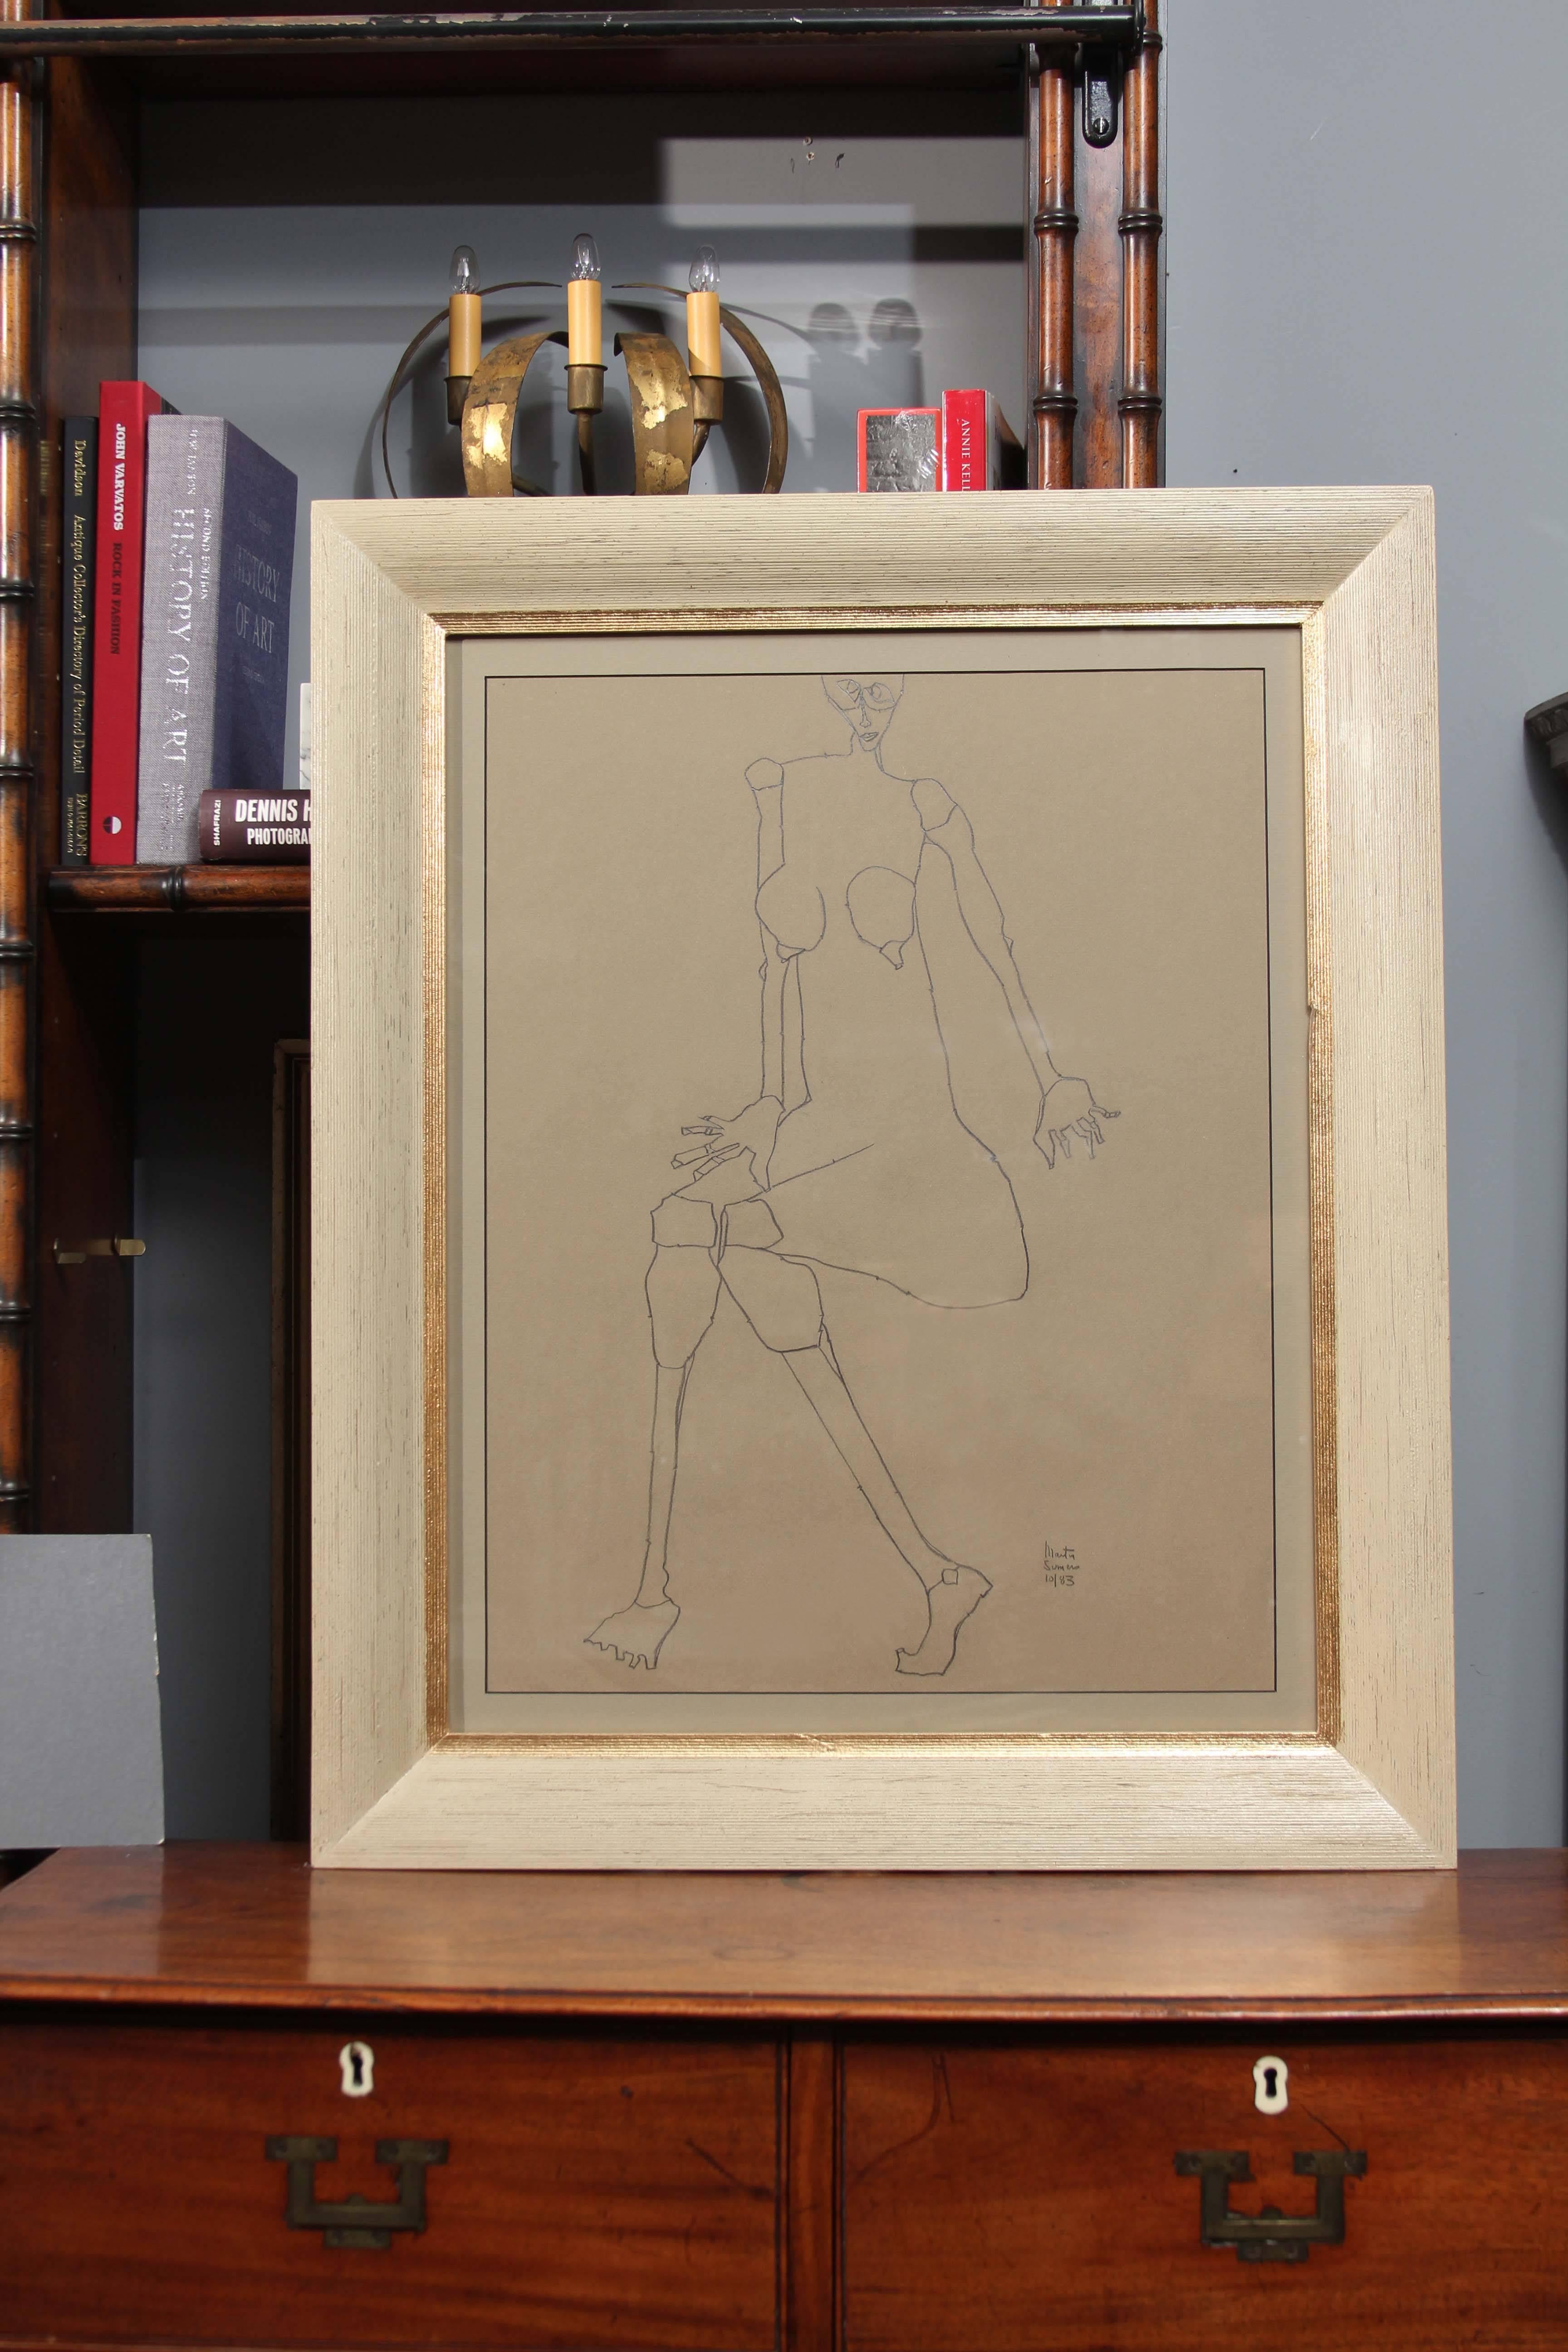 Signed and dated drawing on paper in vintage frame by artist Martin Sumers.